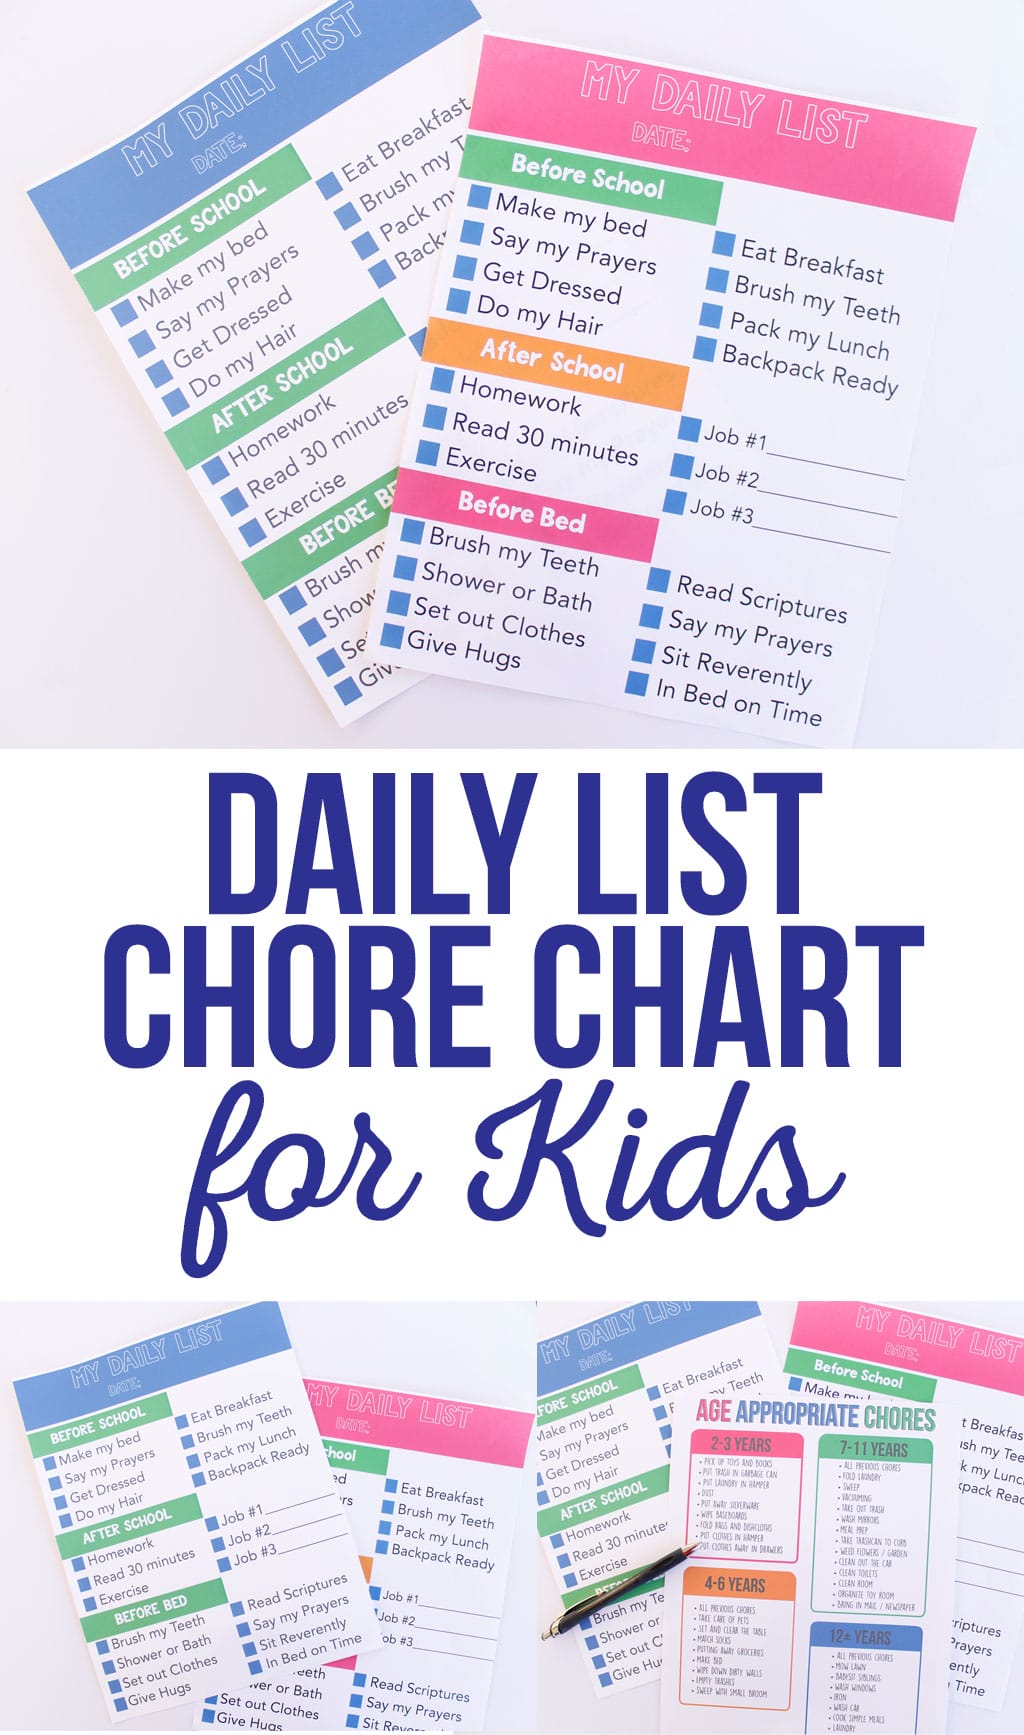 The perfect chore chart for older kids.  Daily List Chore Chart for Kids keeps them on task and gives them motivation get everything done.